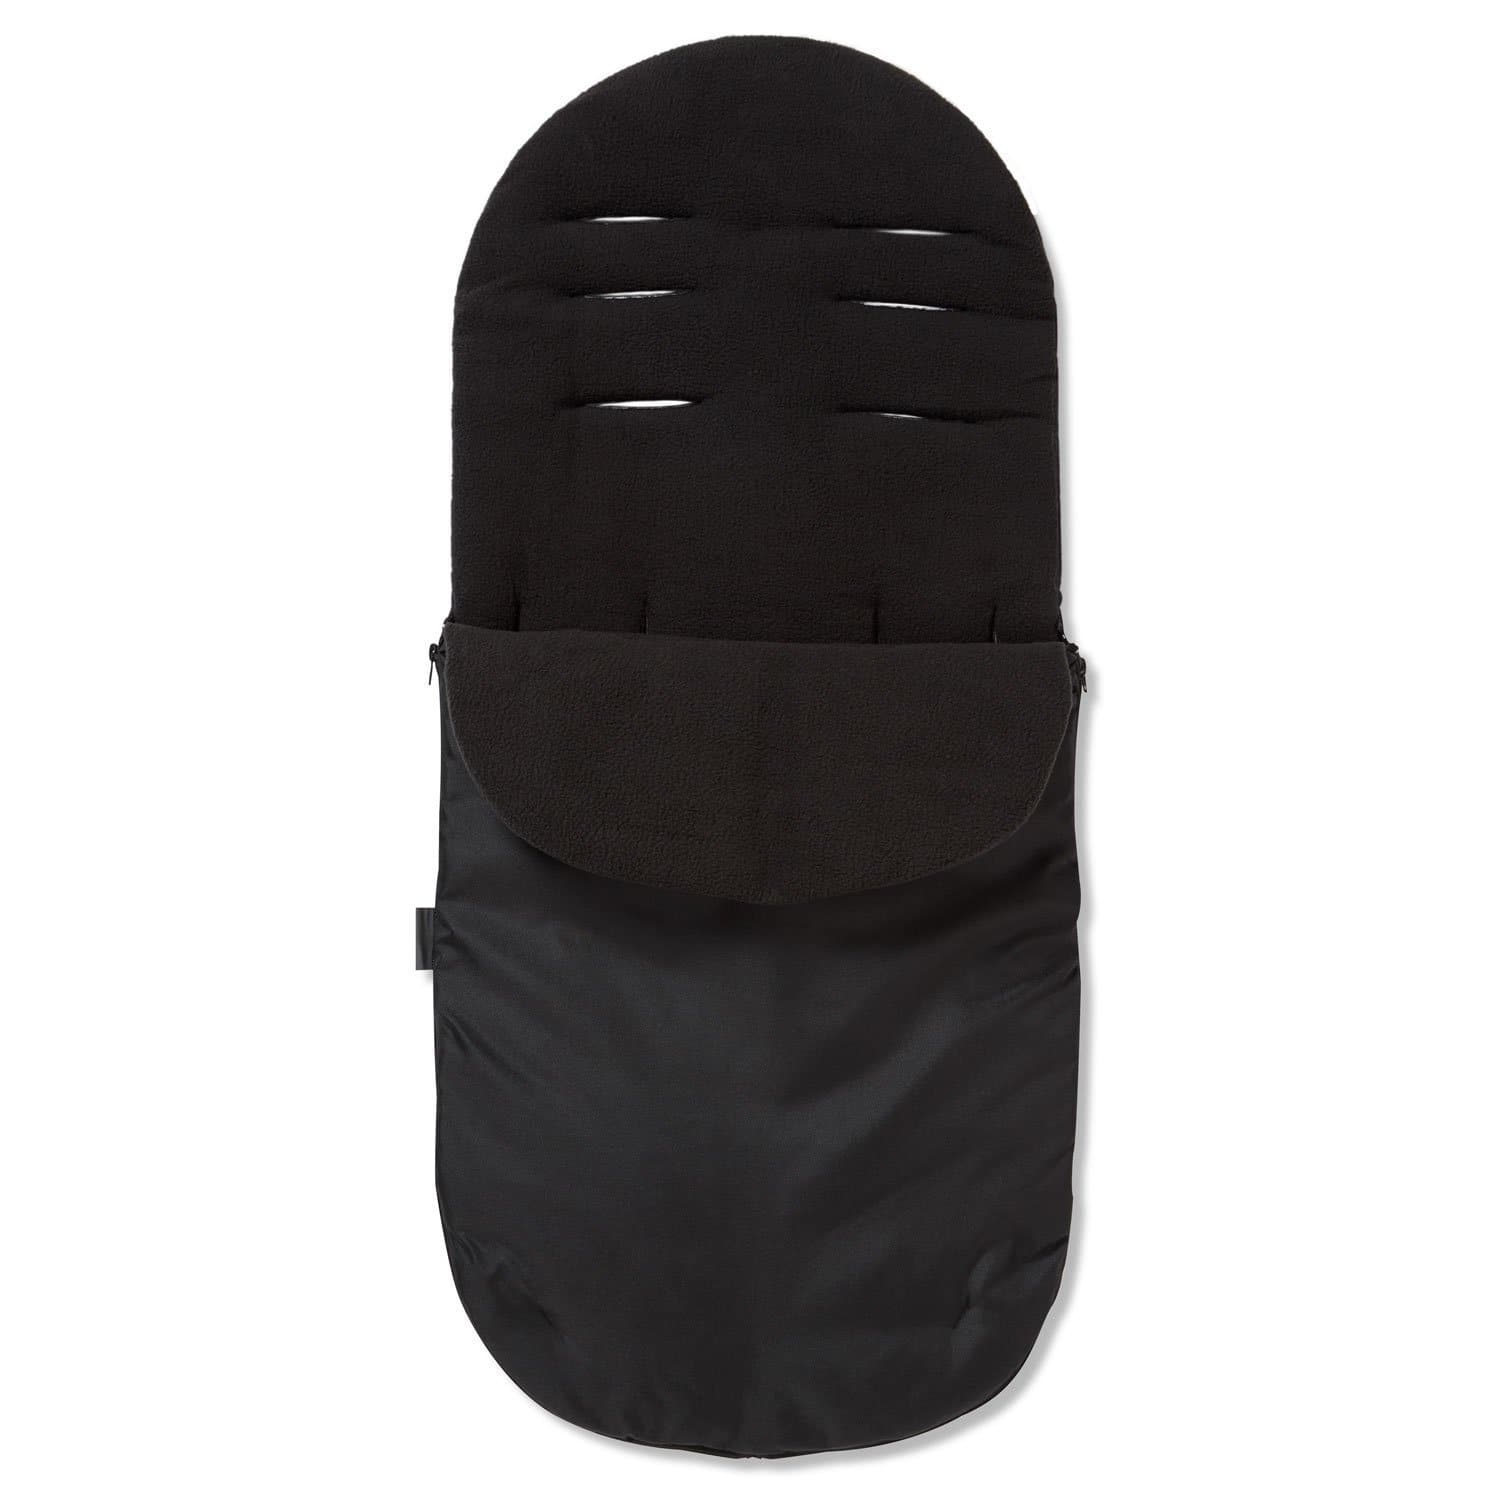 Footmuff / Cosy Toes Compatible with BabyCare - Black / Fits All Models | For Your Little One